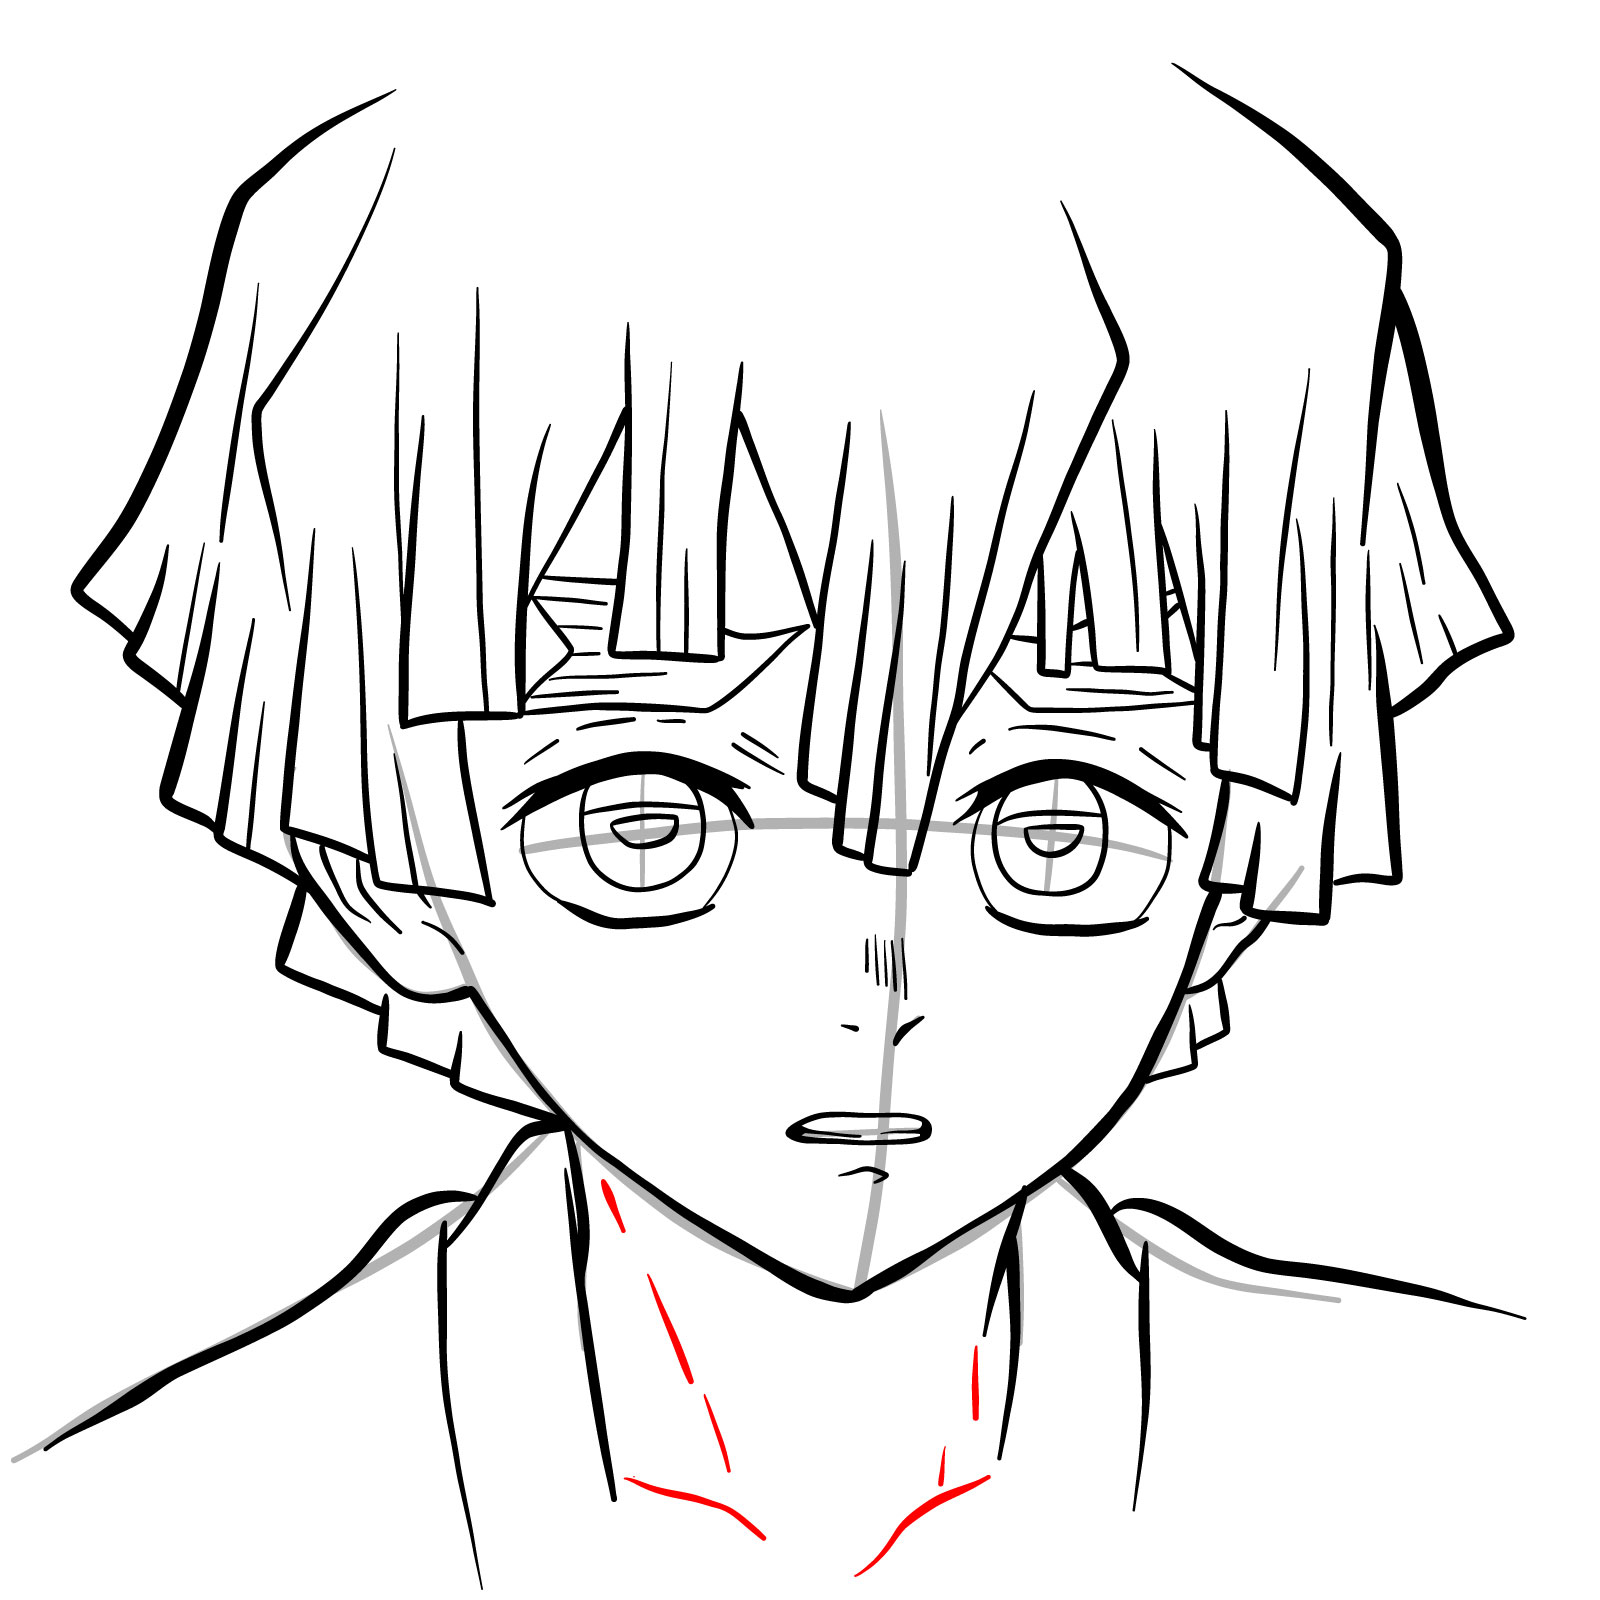 How to draw Zenitsu's face - step 21